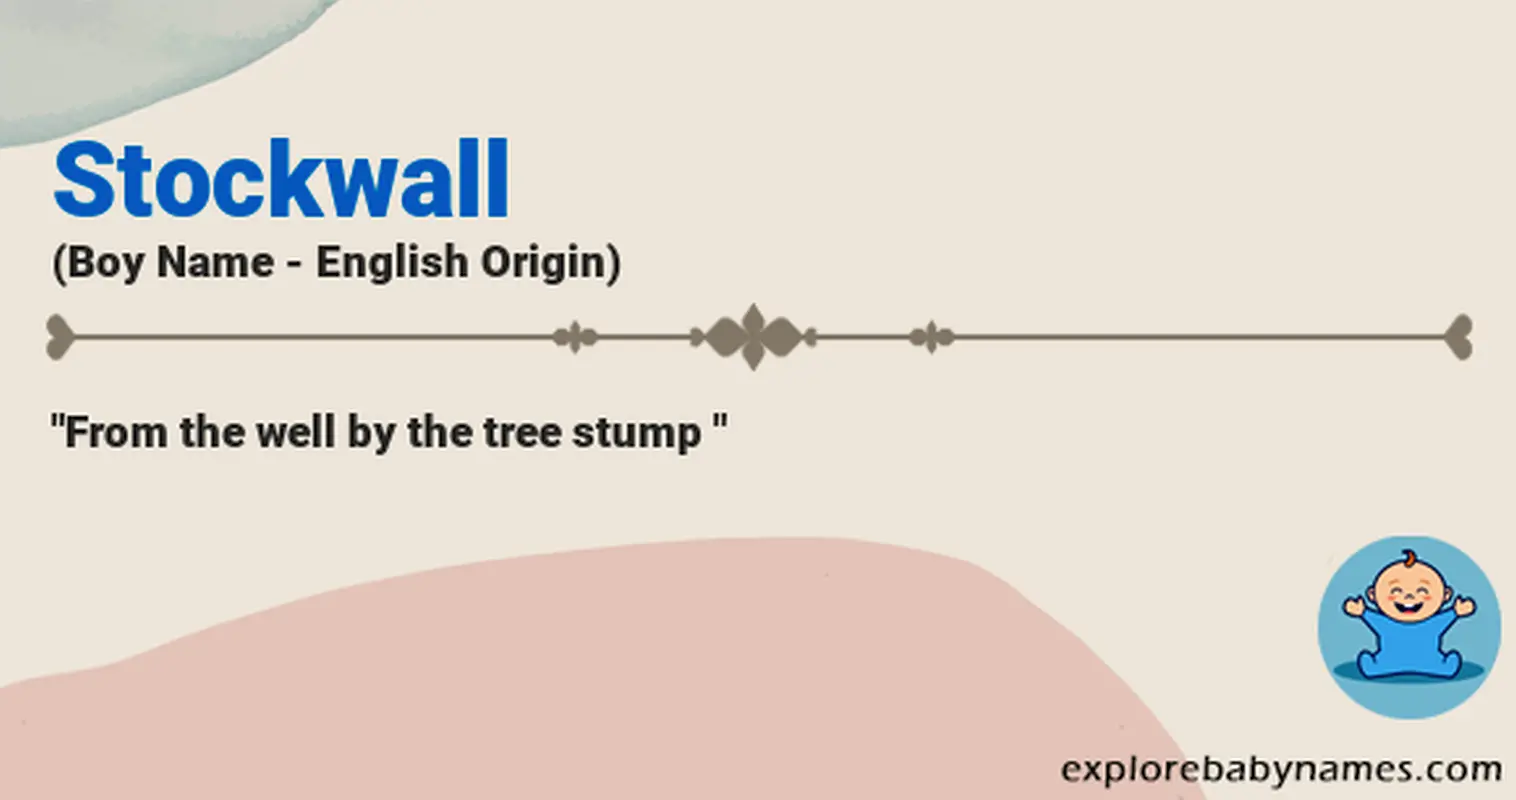 Meaning of Stockwall